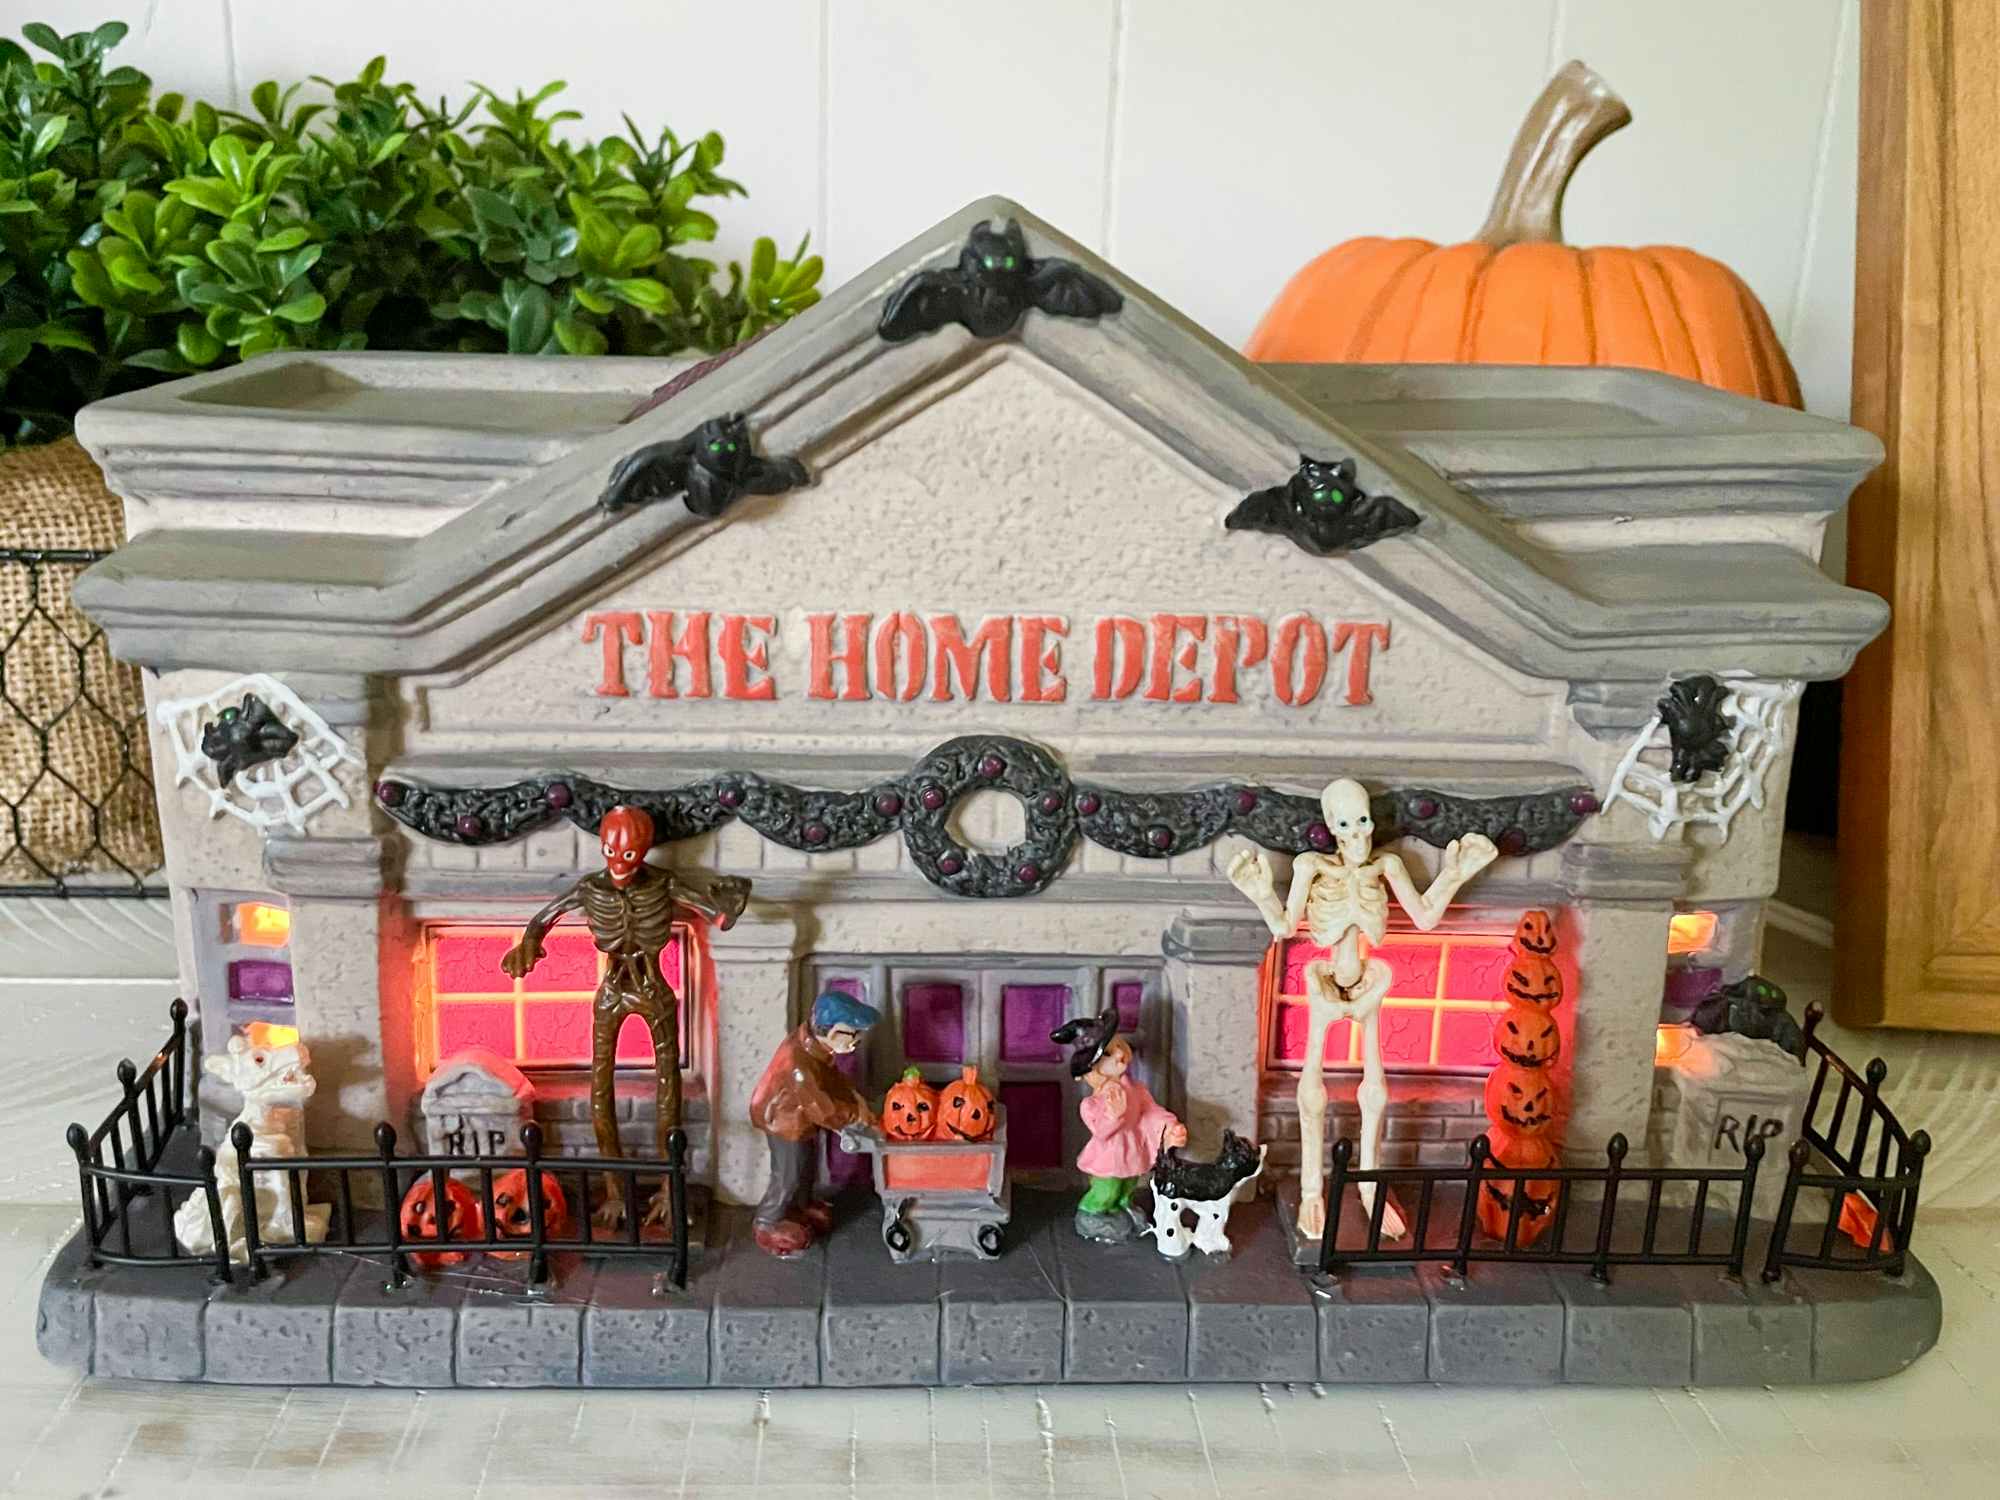 a Halloween lighted village house from Home Depot